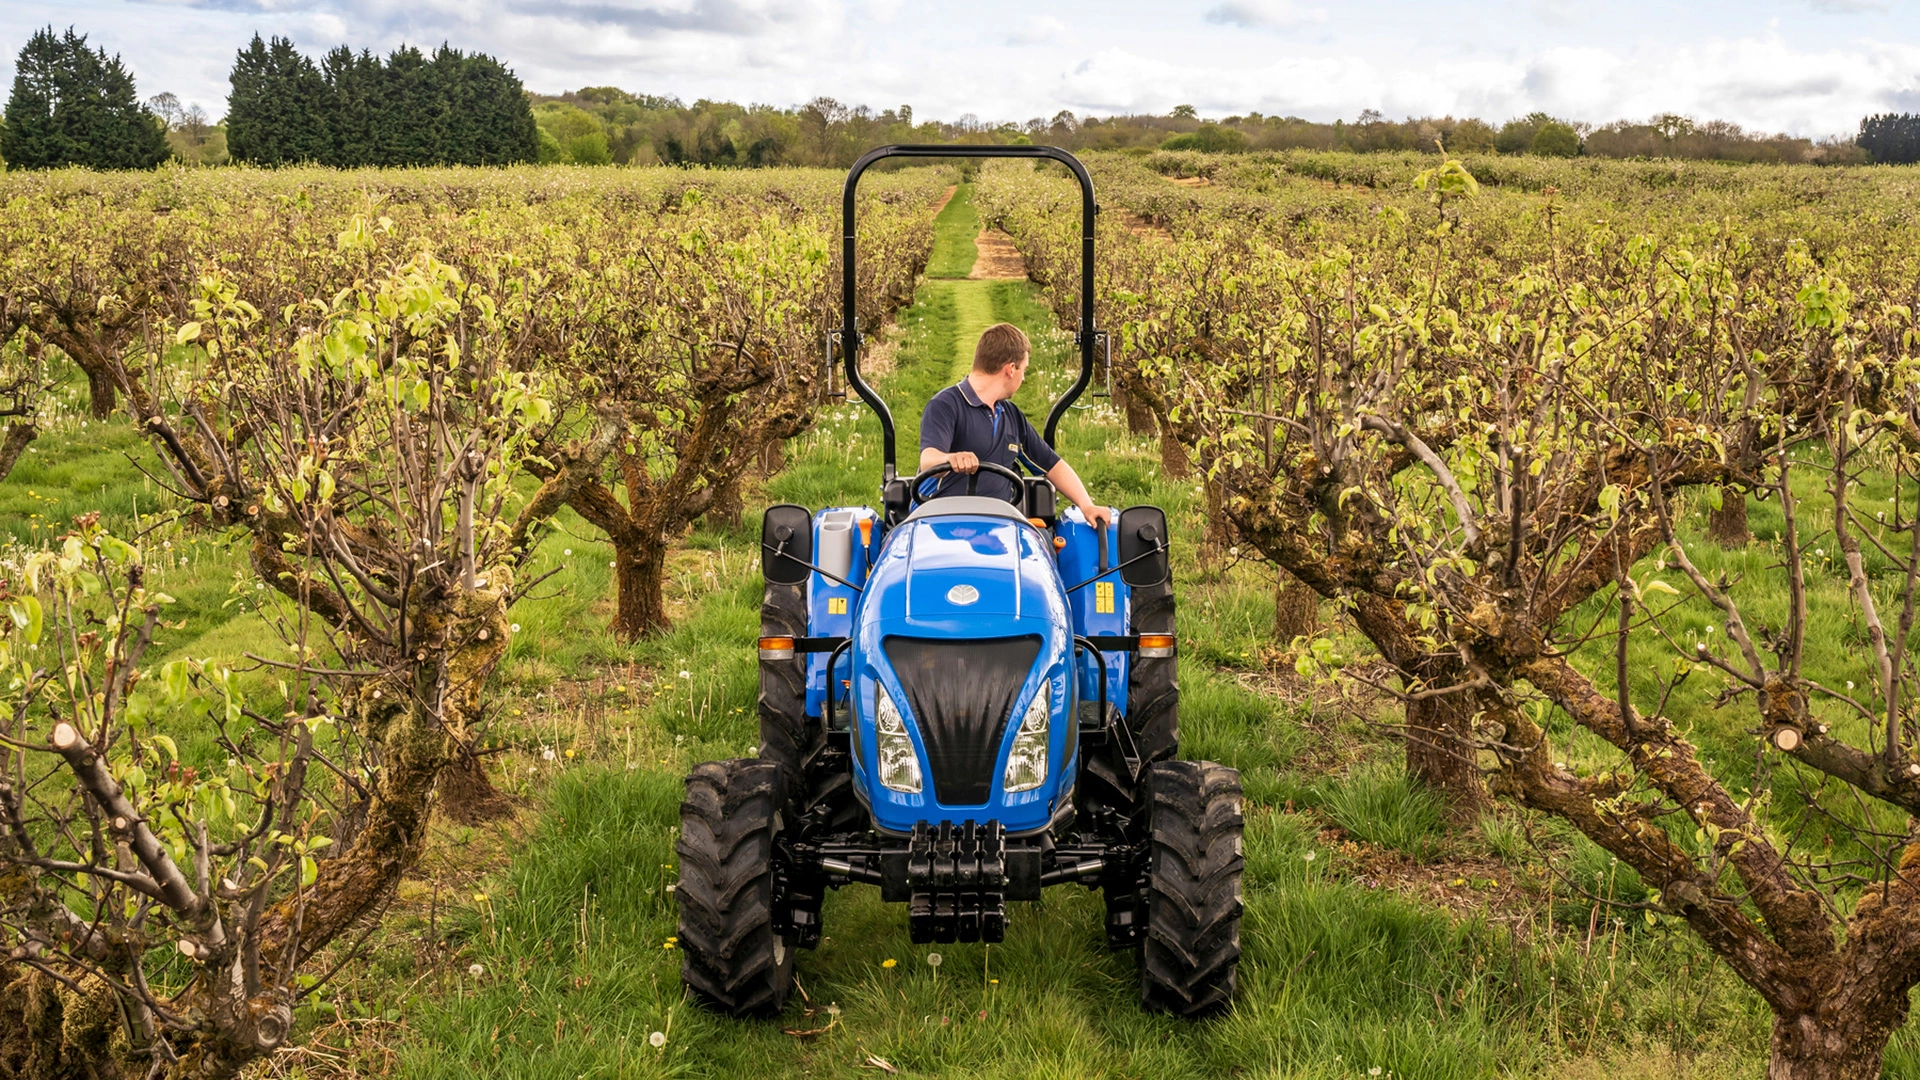 New Holland Boomer tractor performing duties on a orchard field